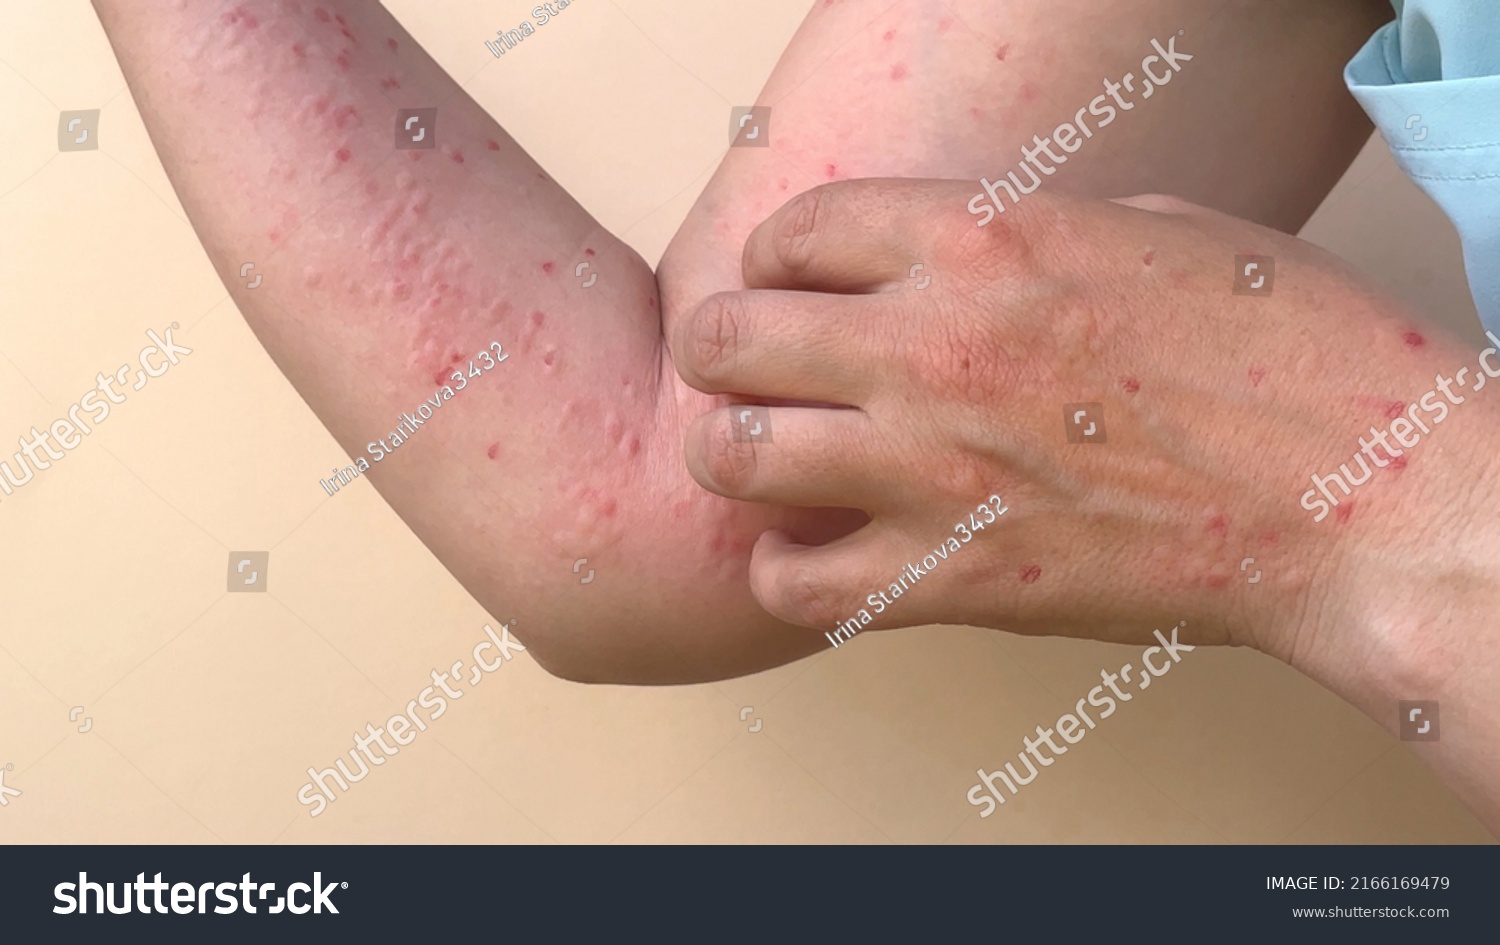 Monkey pox virus, a new world problem of modern humanity. Banner with hands of a sick person with pimples and blisters. Smallpox vaccine. #2166169479